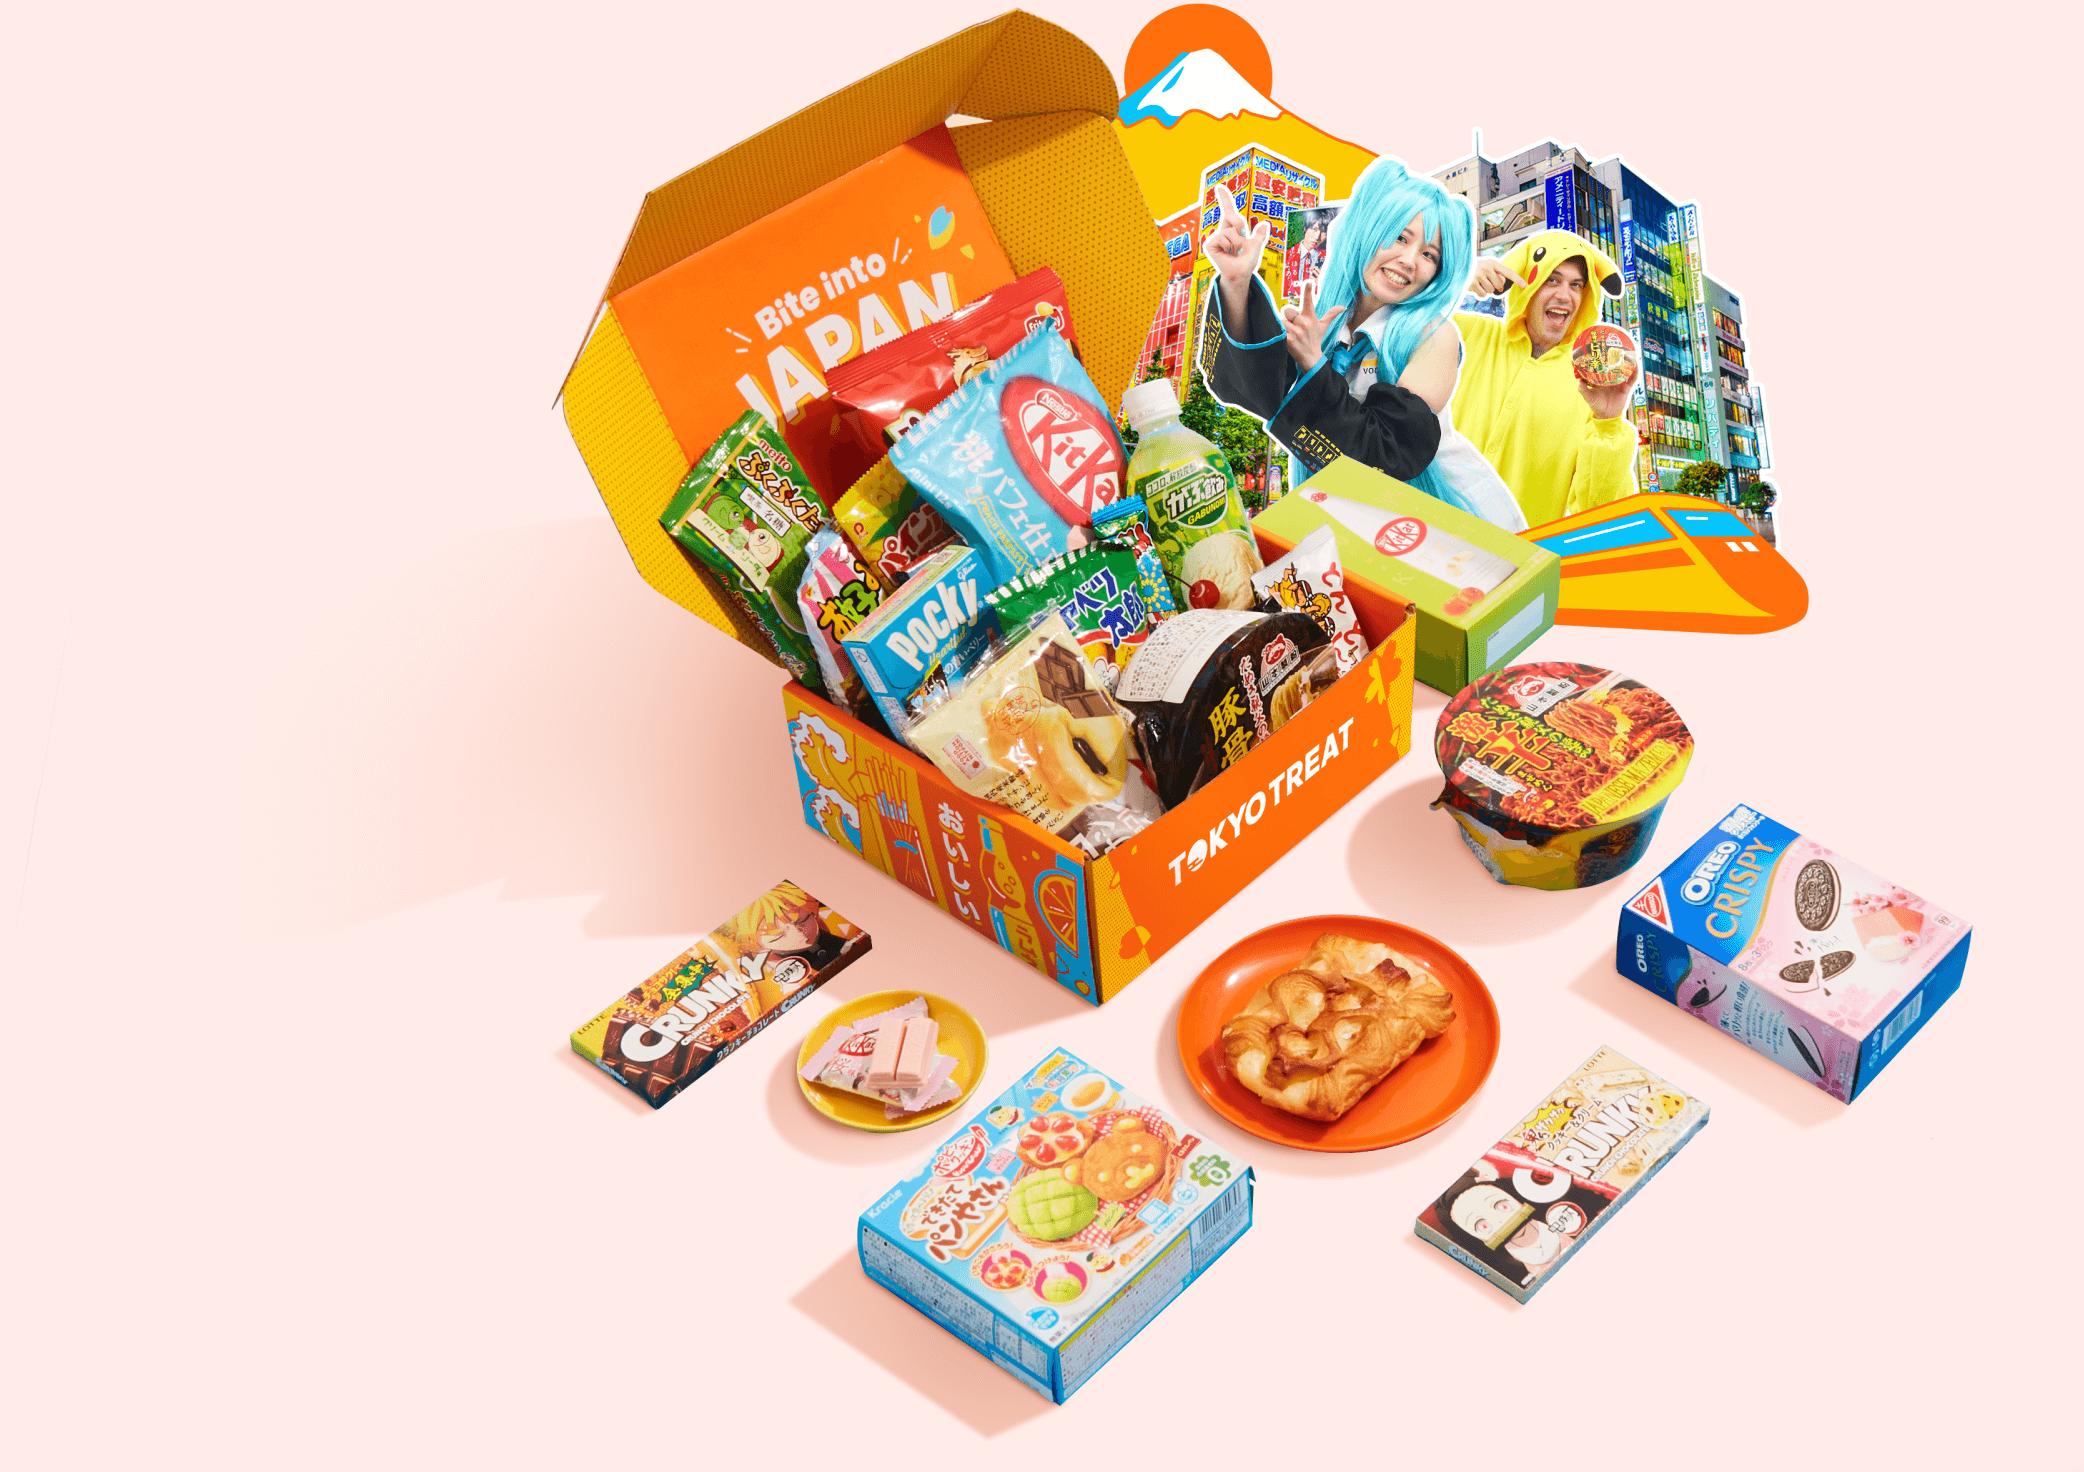 A TokyoTreat box filled with Japanese snacks